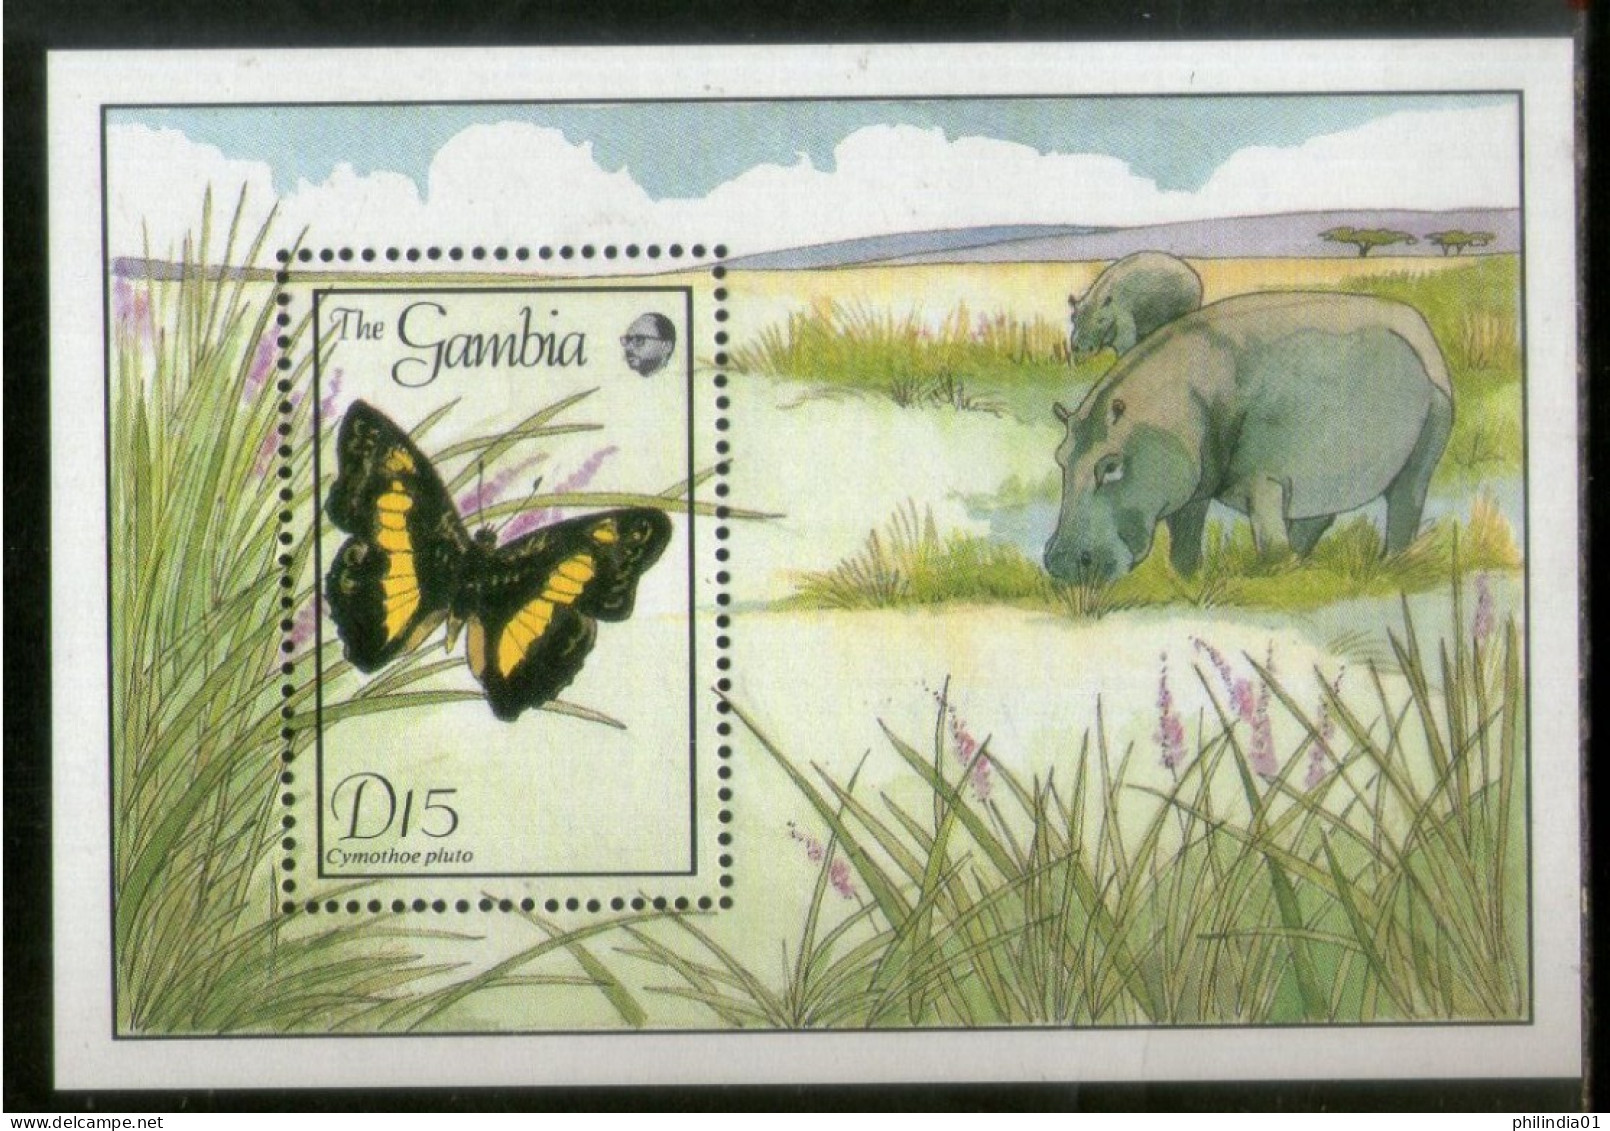 Gambia 1989 Butterflies Moth Insect Hippo Wildlife Animals Sc 845 M/s MNH # 1584 - Mariposas